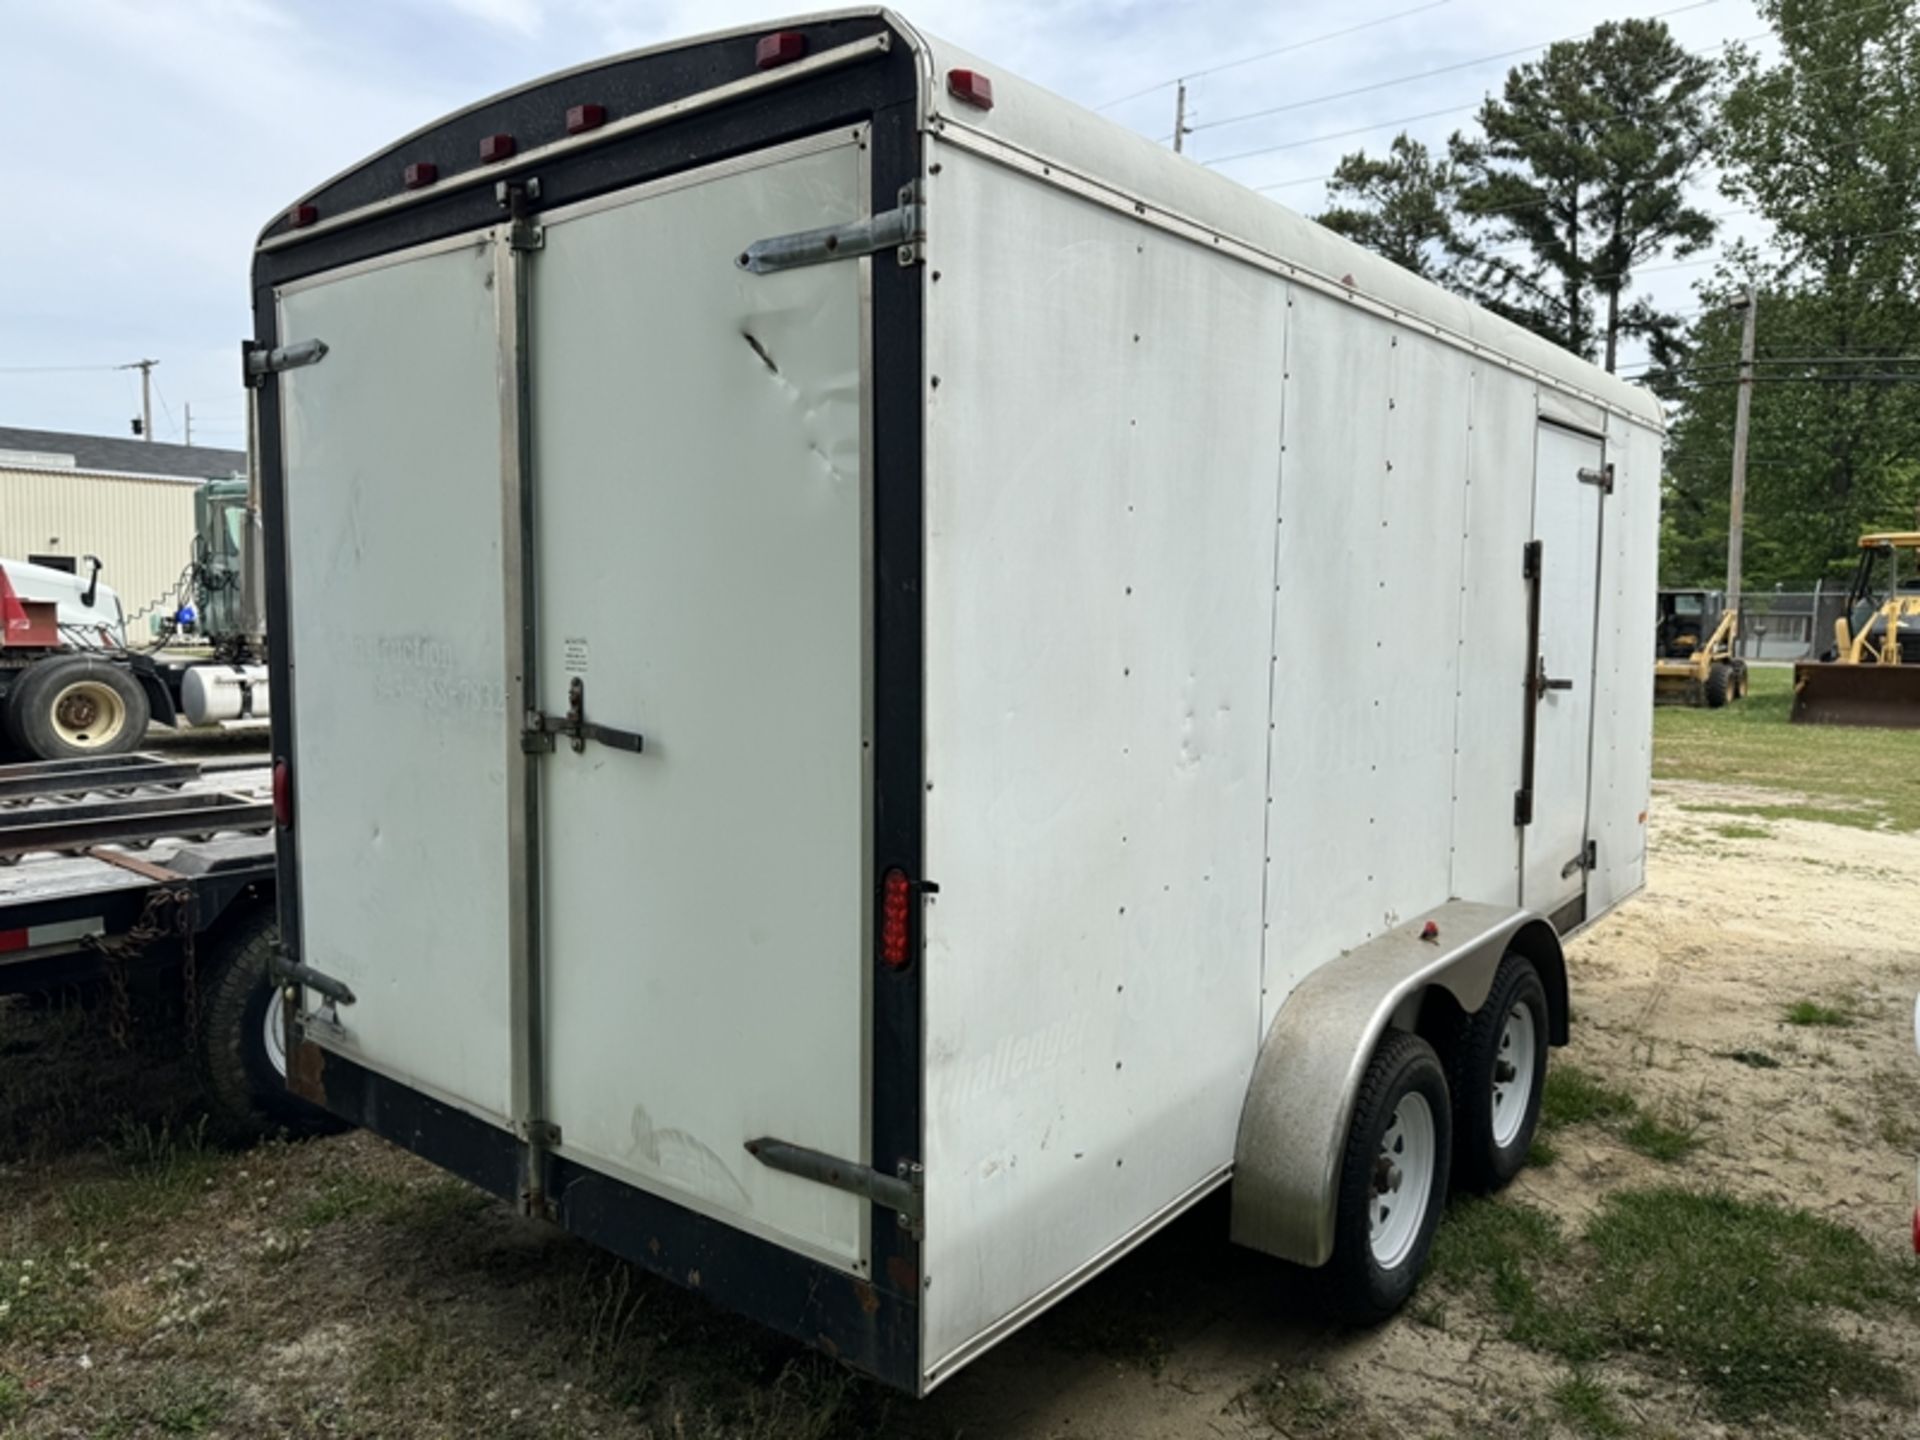 2001 HOMESTEADER 16' dual-axle enclosed trailer with barn doors and side door - 5HABA162111014686 - Image 3 of 5